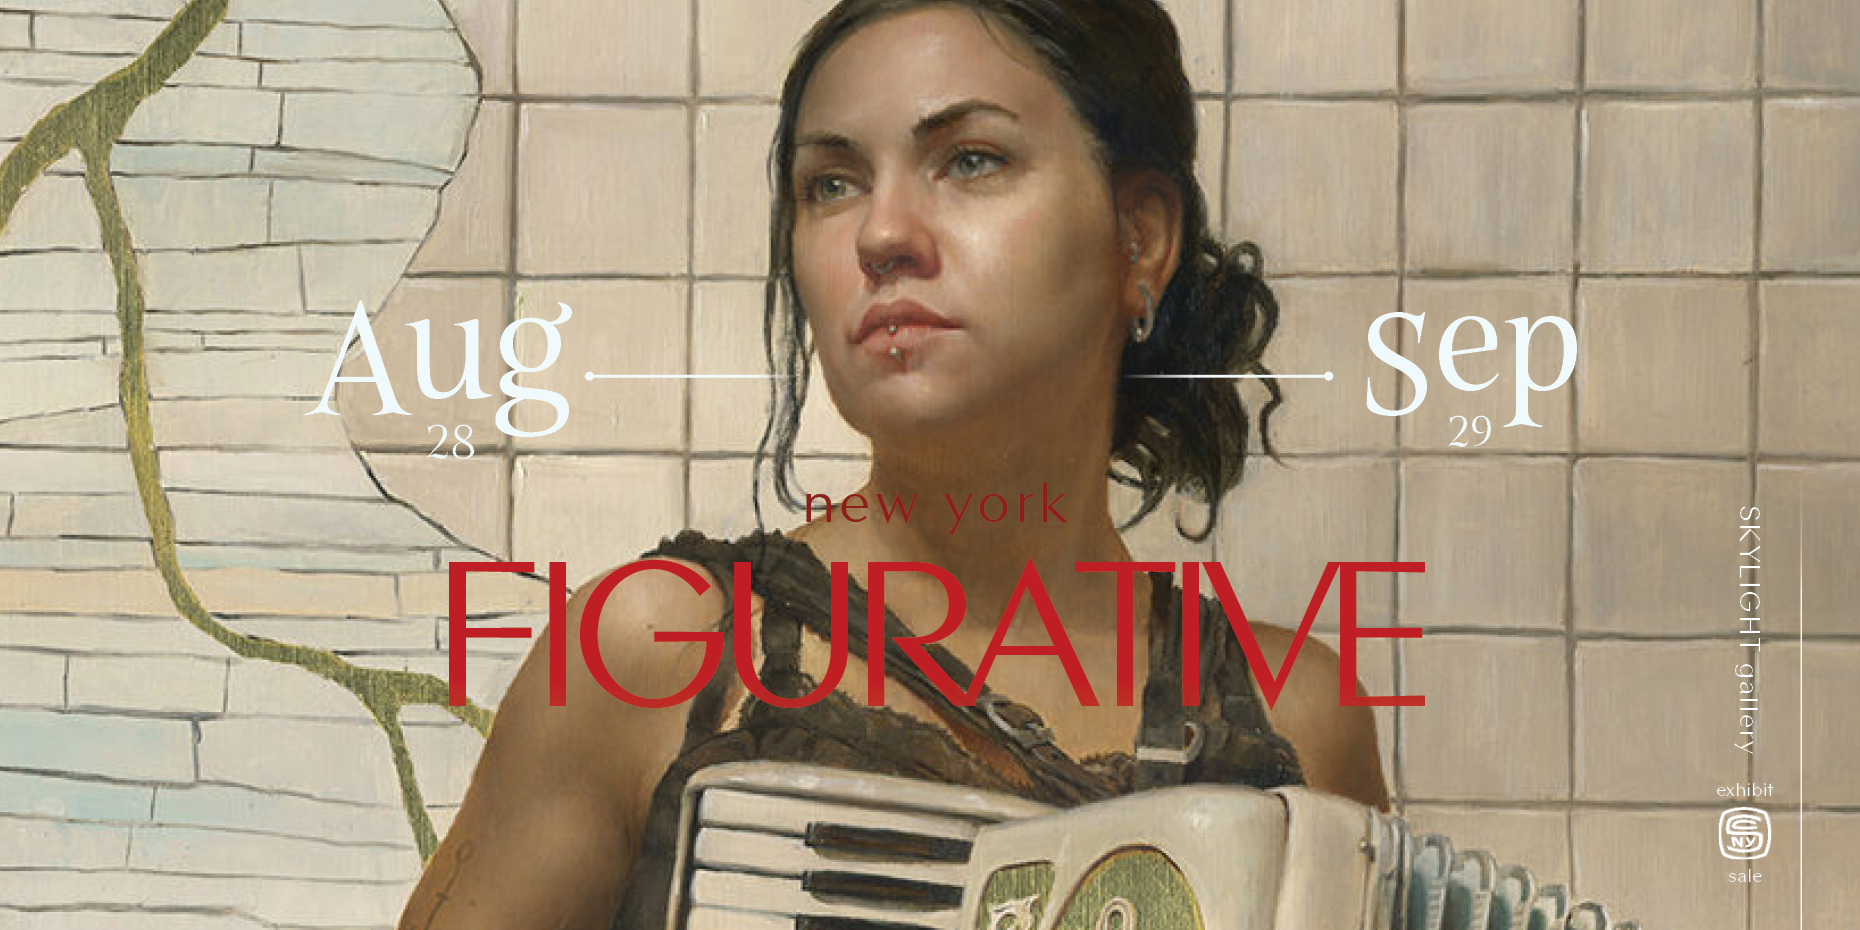 Details for the 2023 SCNY New York Figurative exhibit.